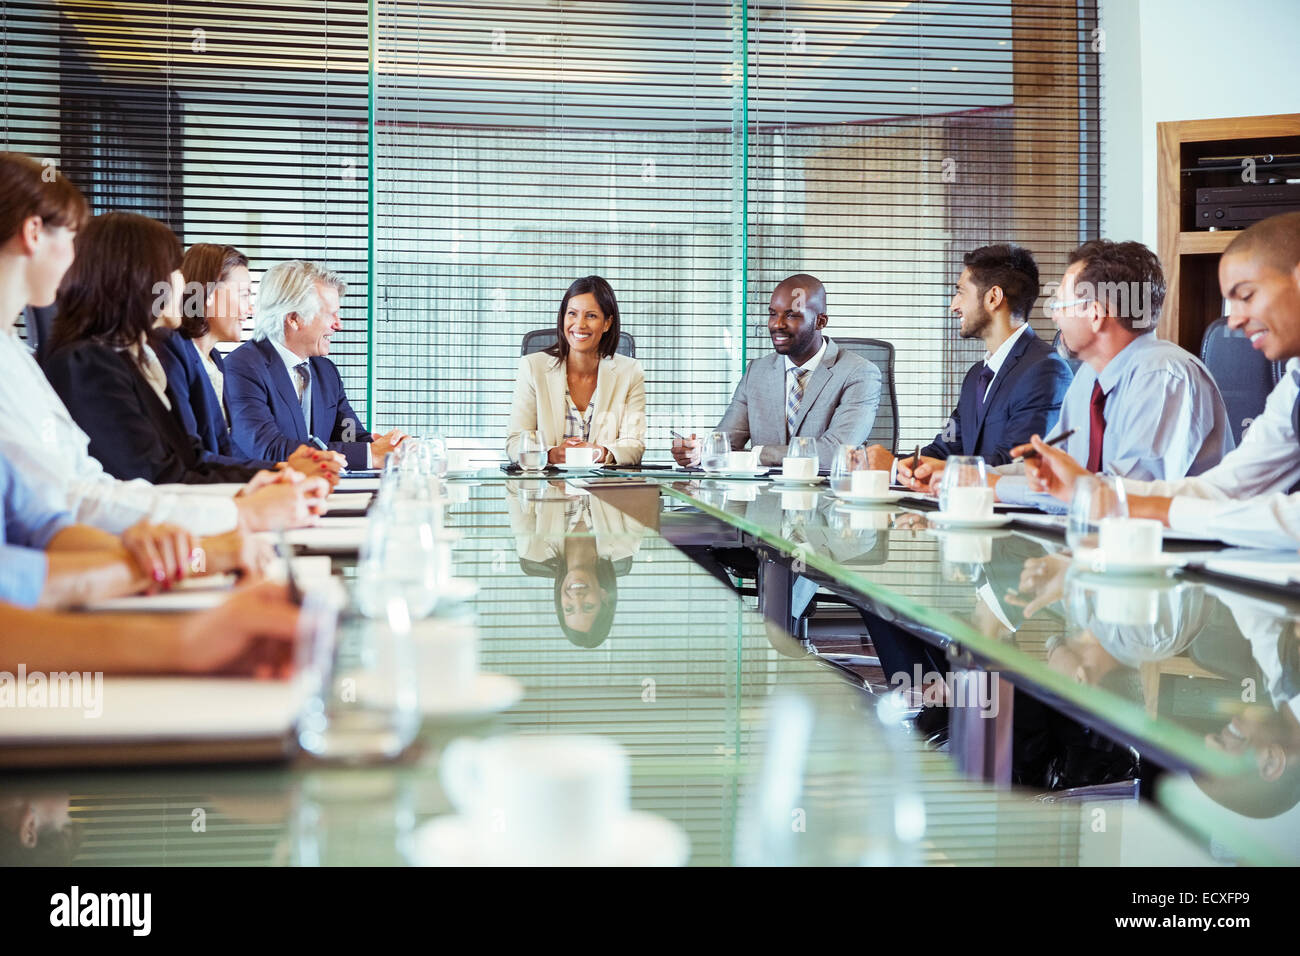 Business people having meeting in in conference room, smiling and discussing Stock Photo